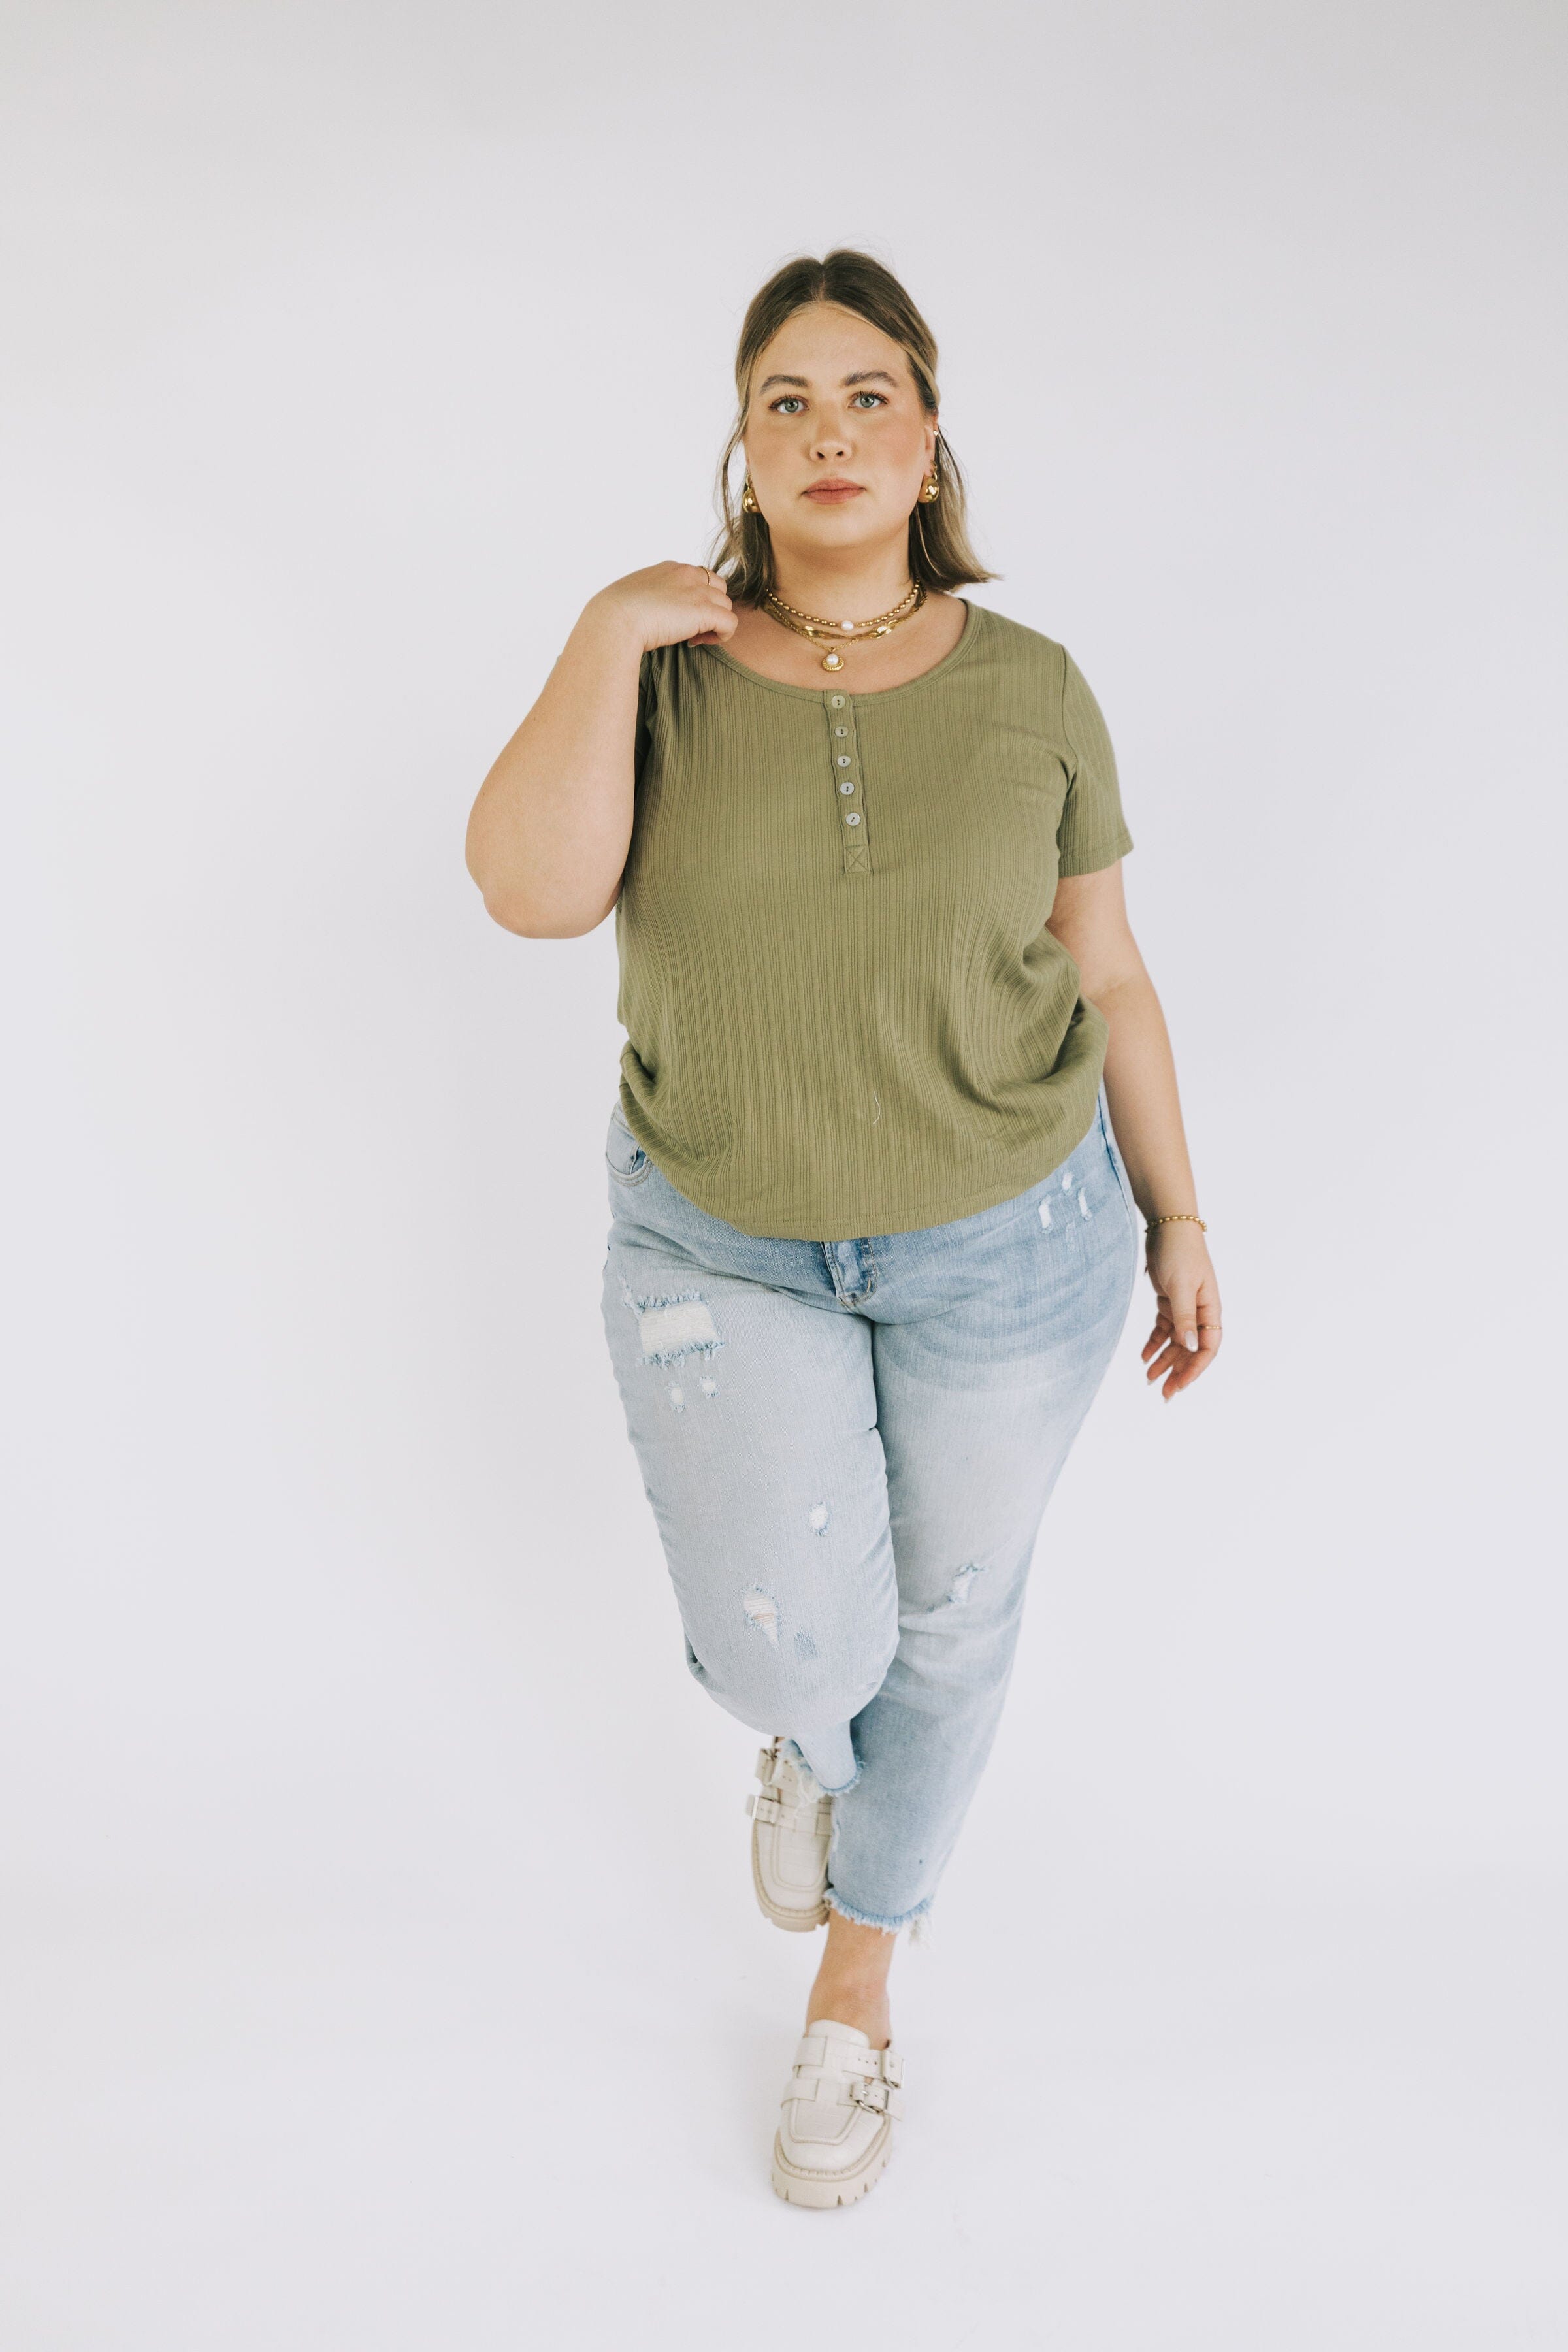 PLUS SIZE - Only Yours Top - 2 Colors!